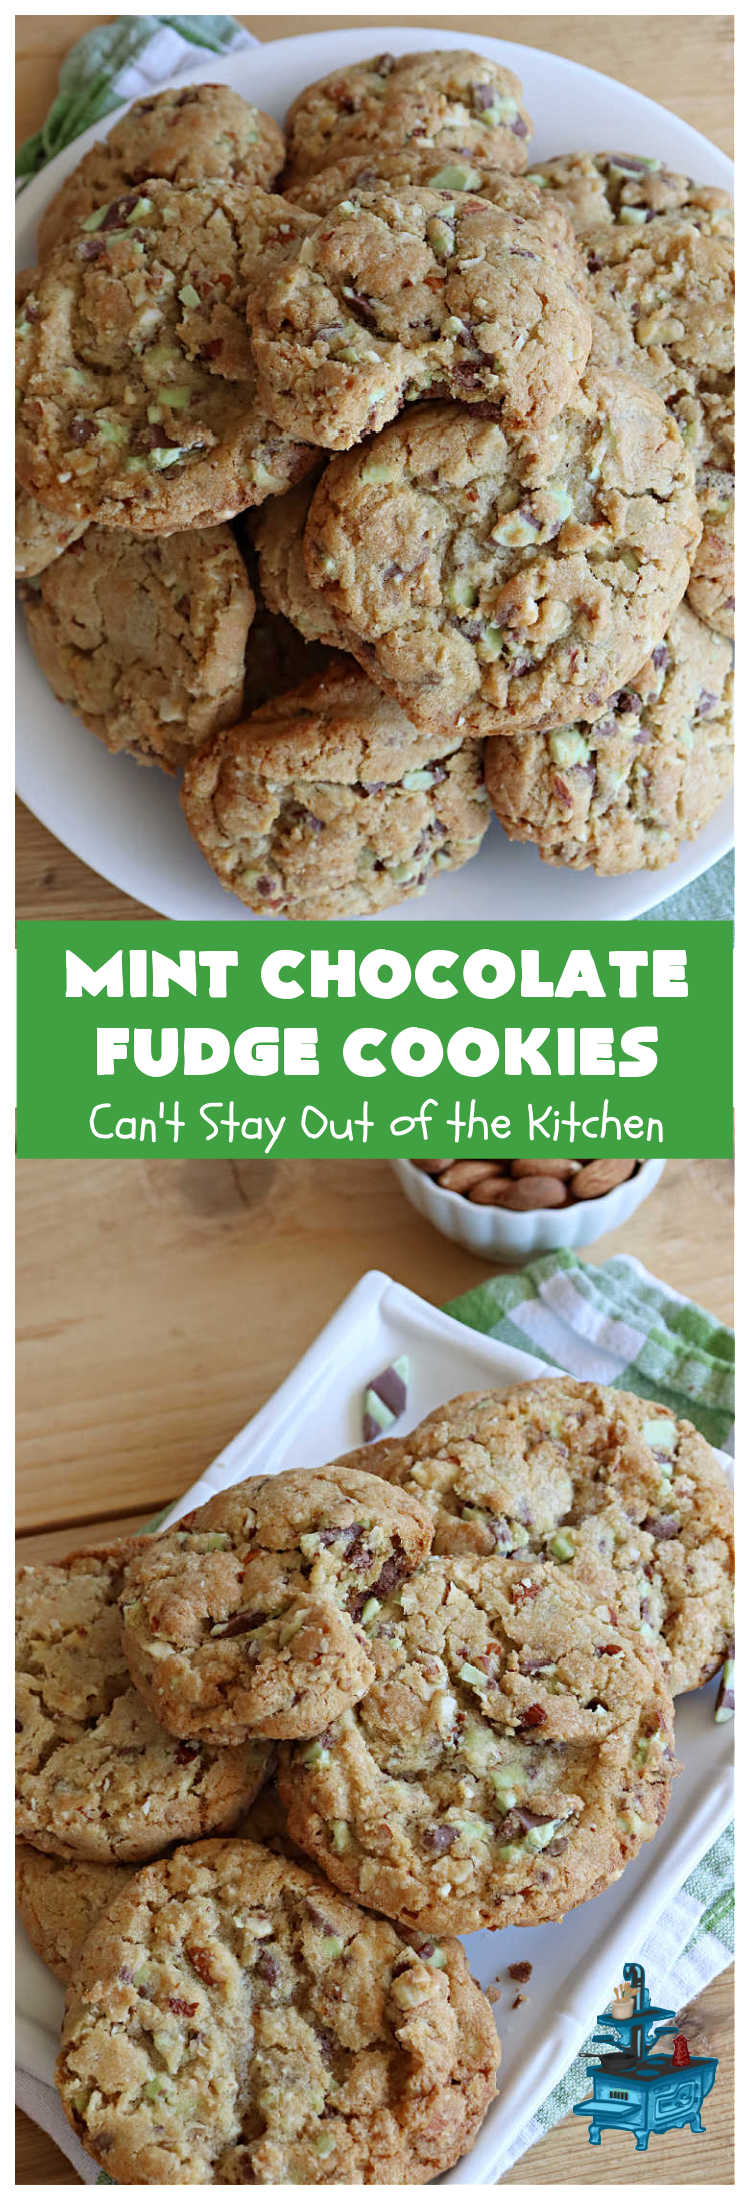 Mint Chocolate Fudge Cookies | Can't Stay Out of the Kitchen